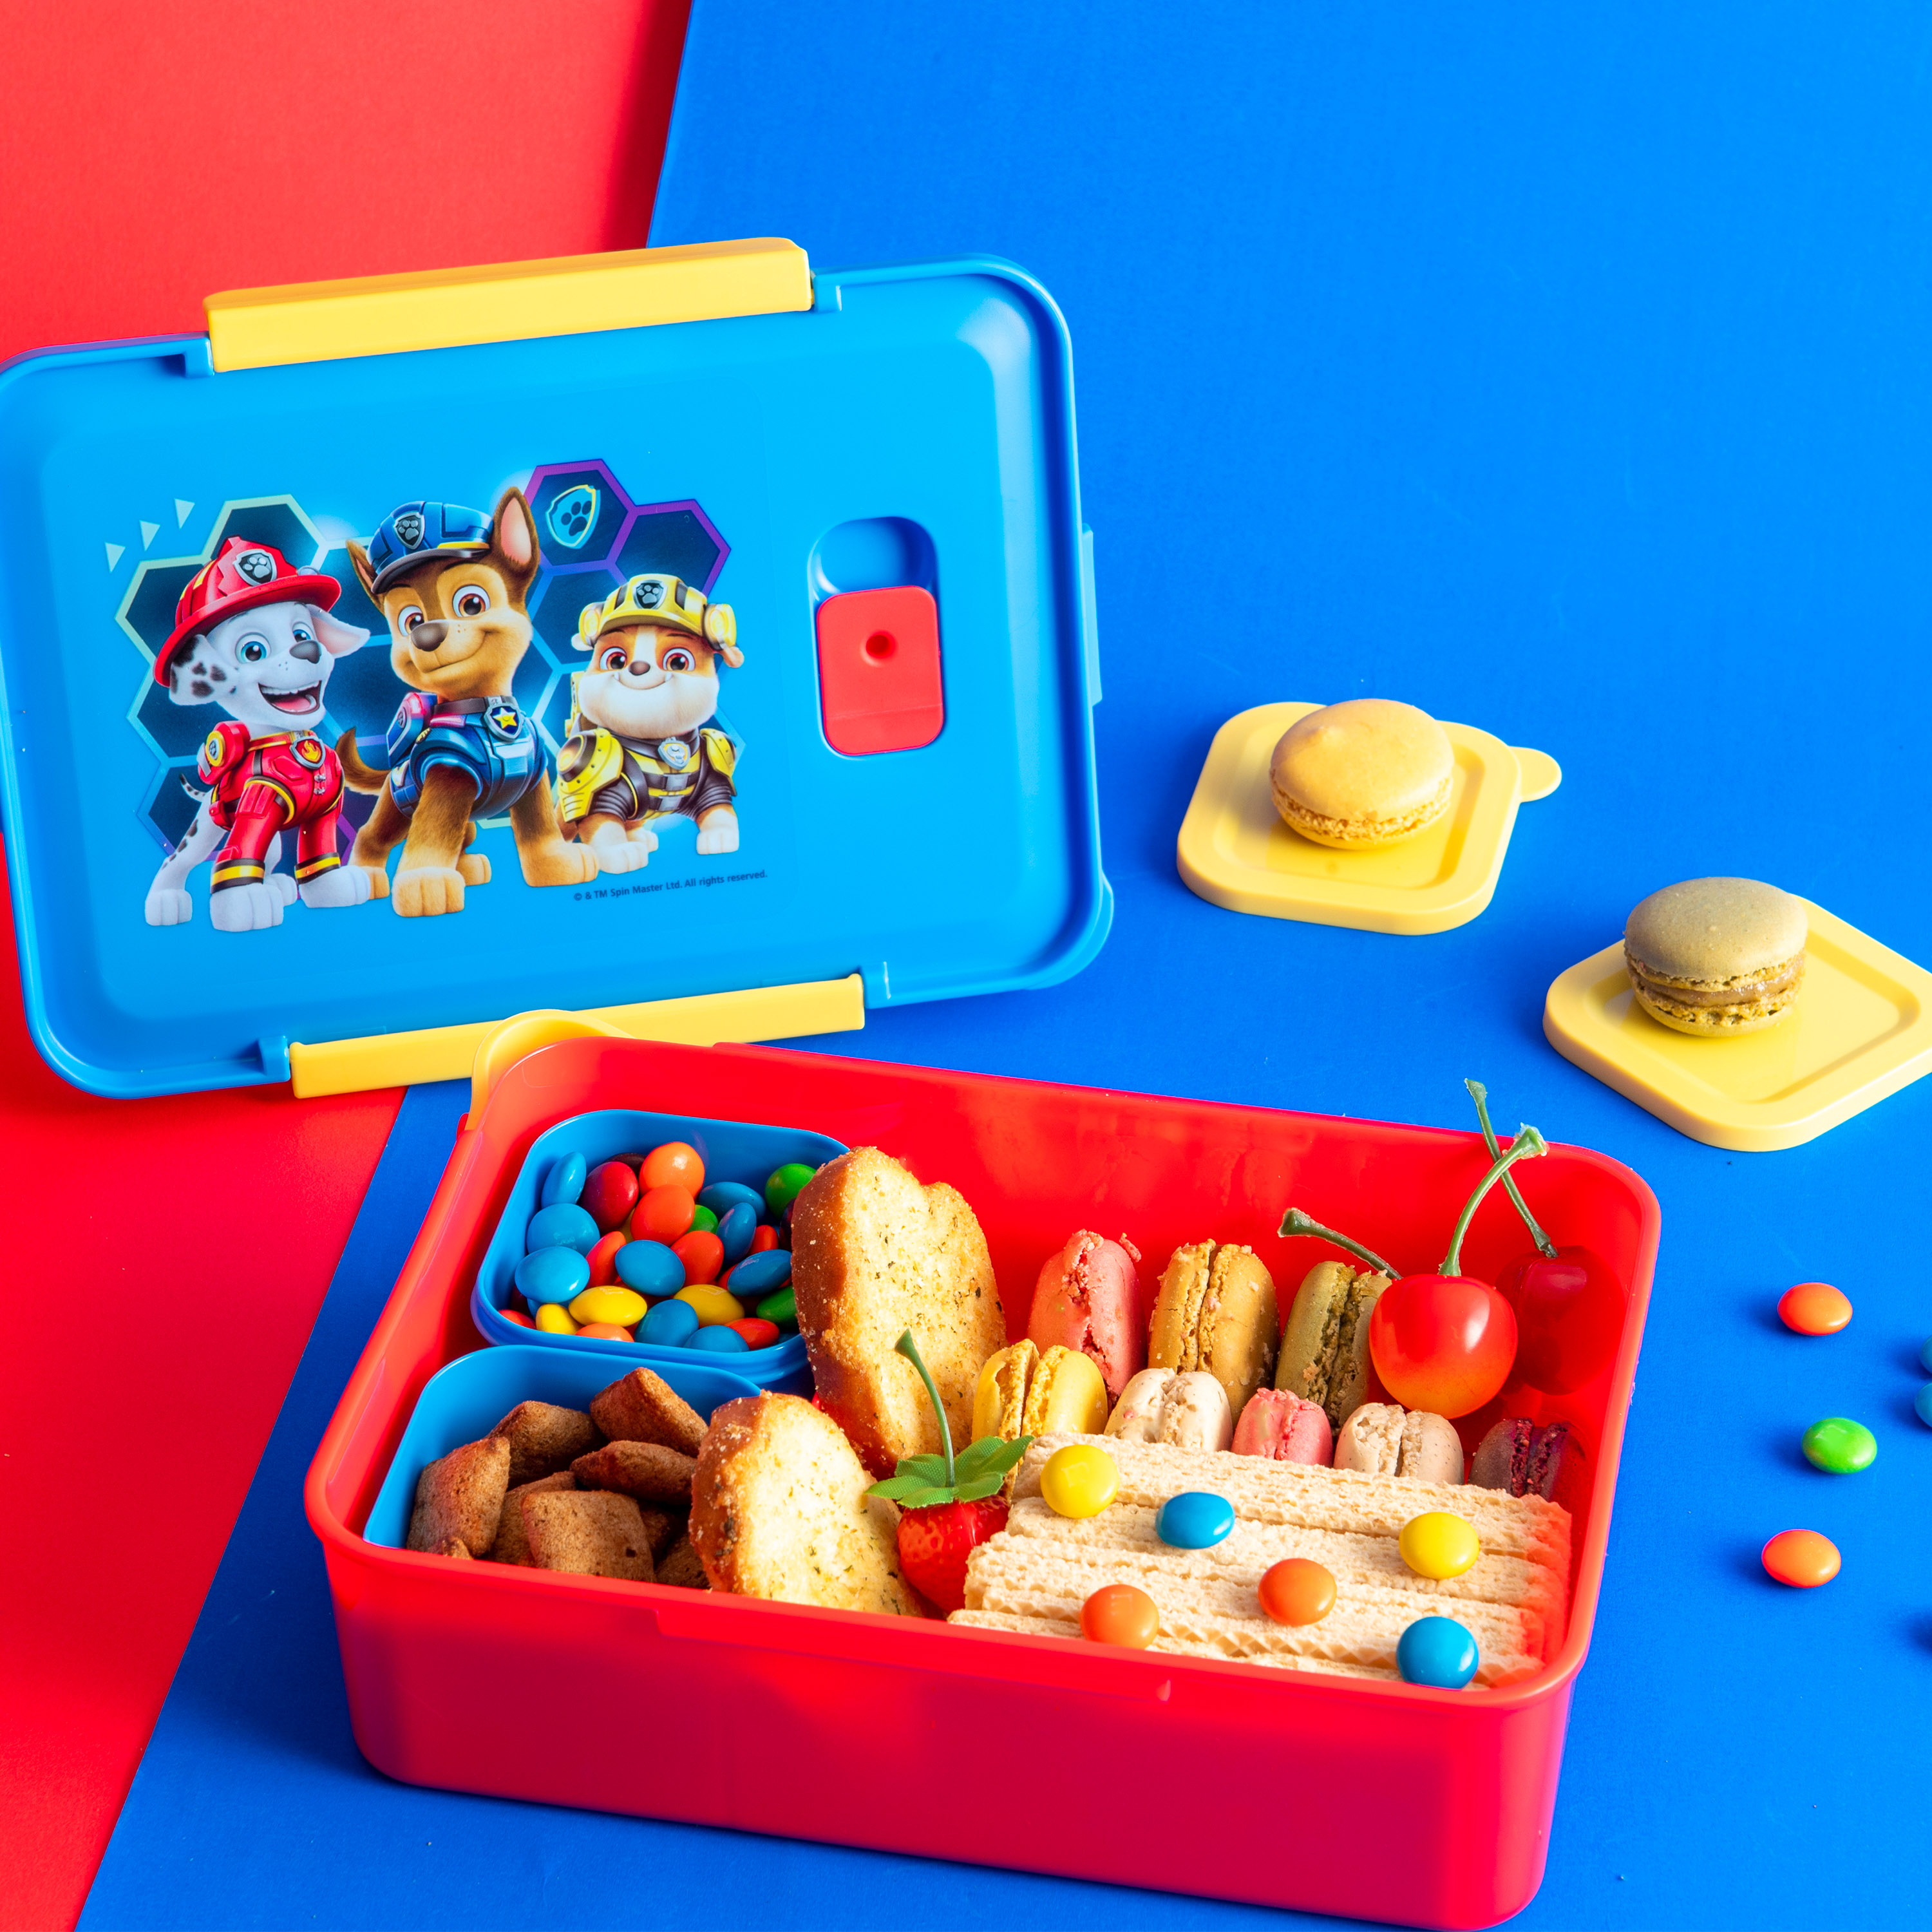 Paw Patrol Movie Reusable Divided Bento Box, Rubble, Marshall and Chase, 3-piece set slideshow image 9